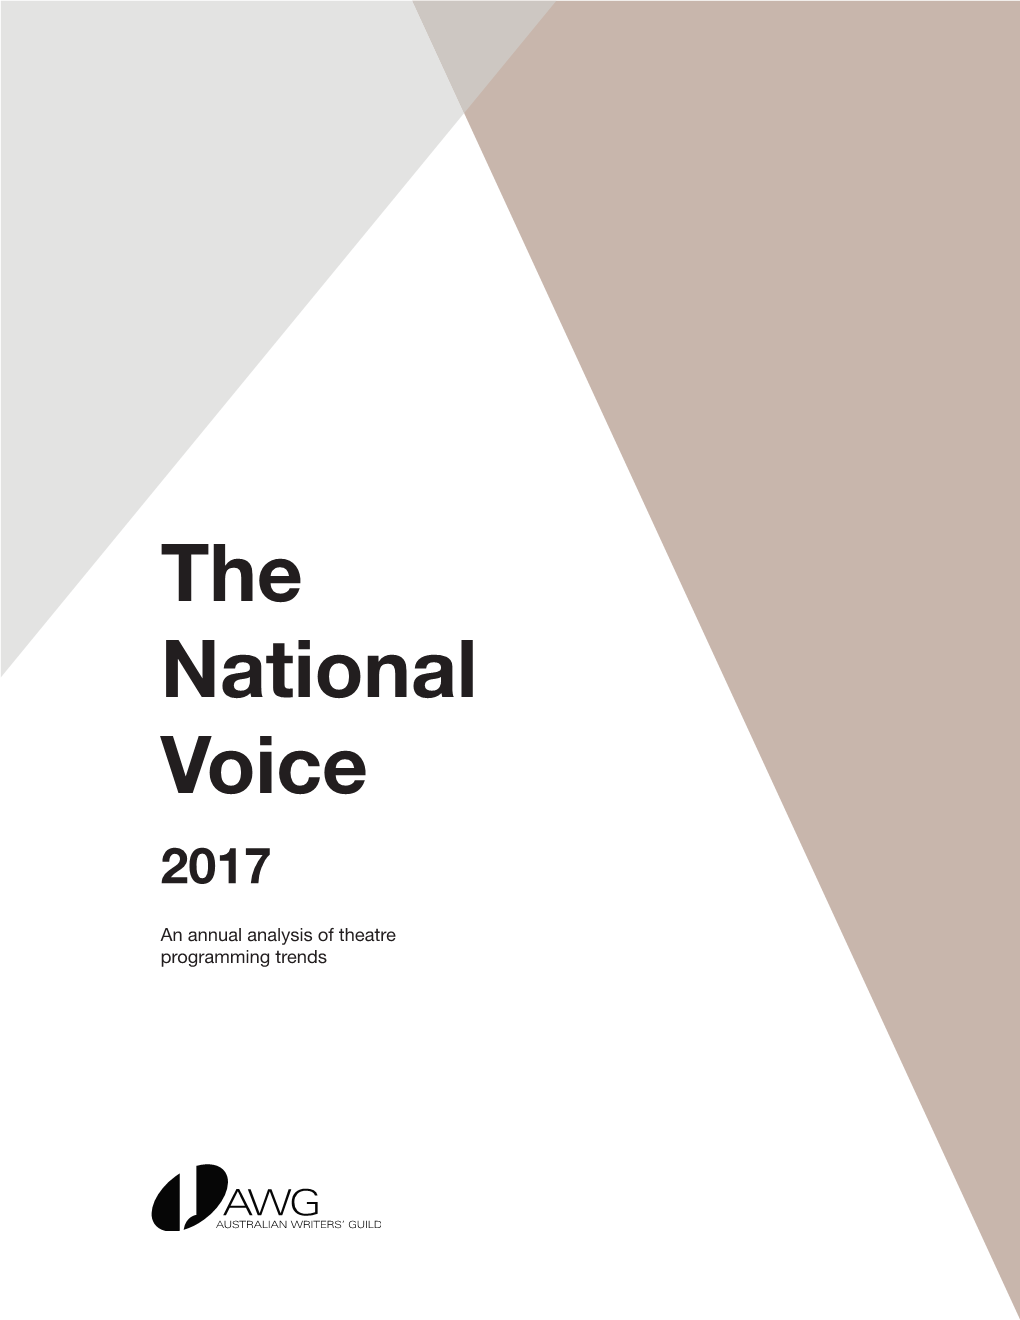 The National Voice 2017